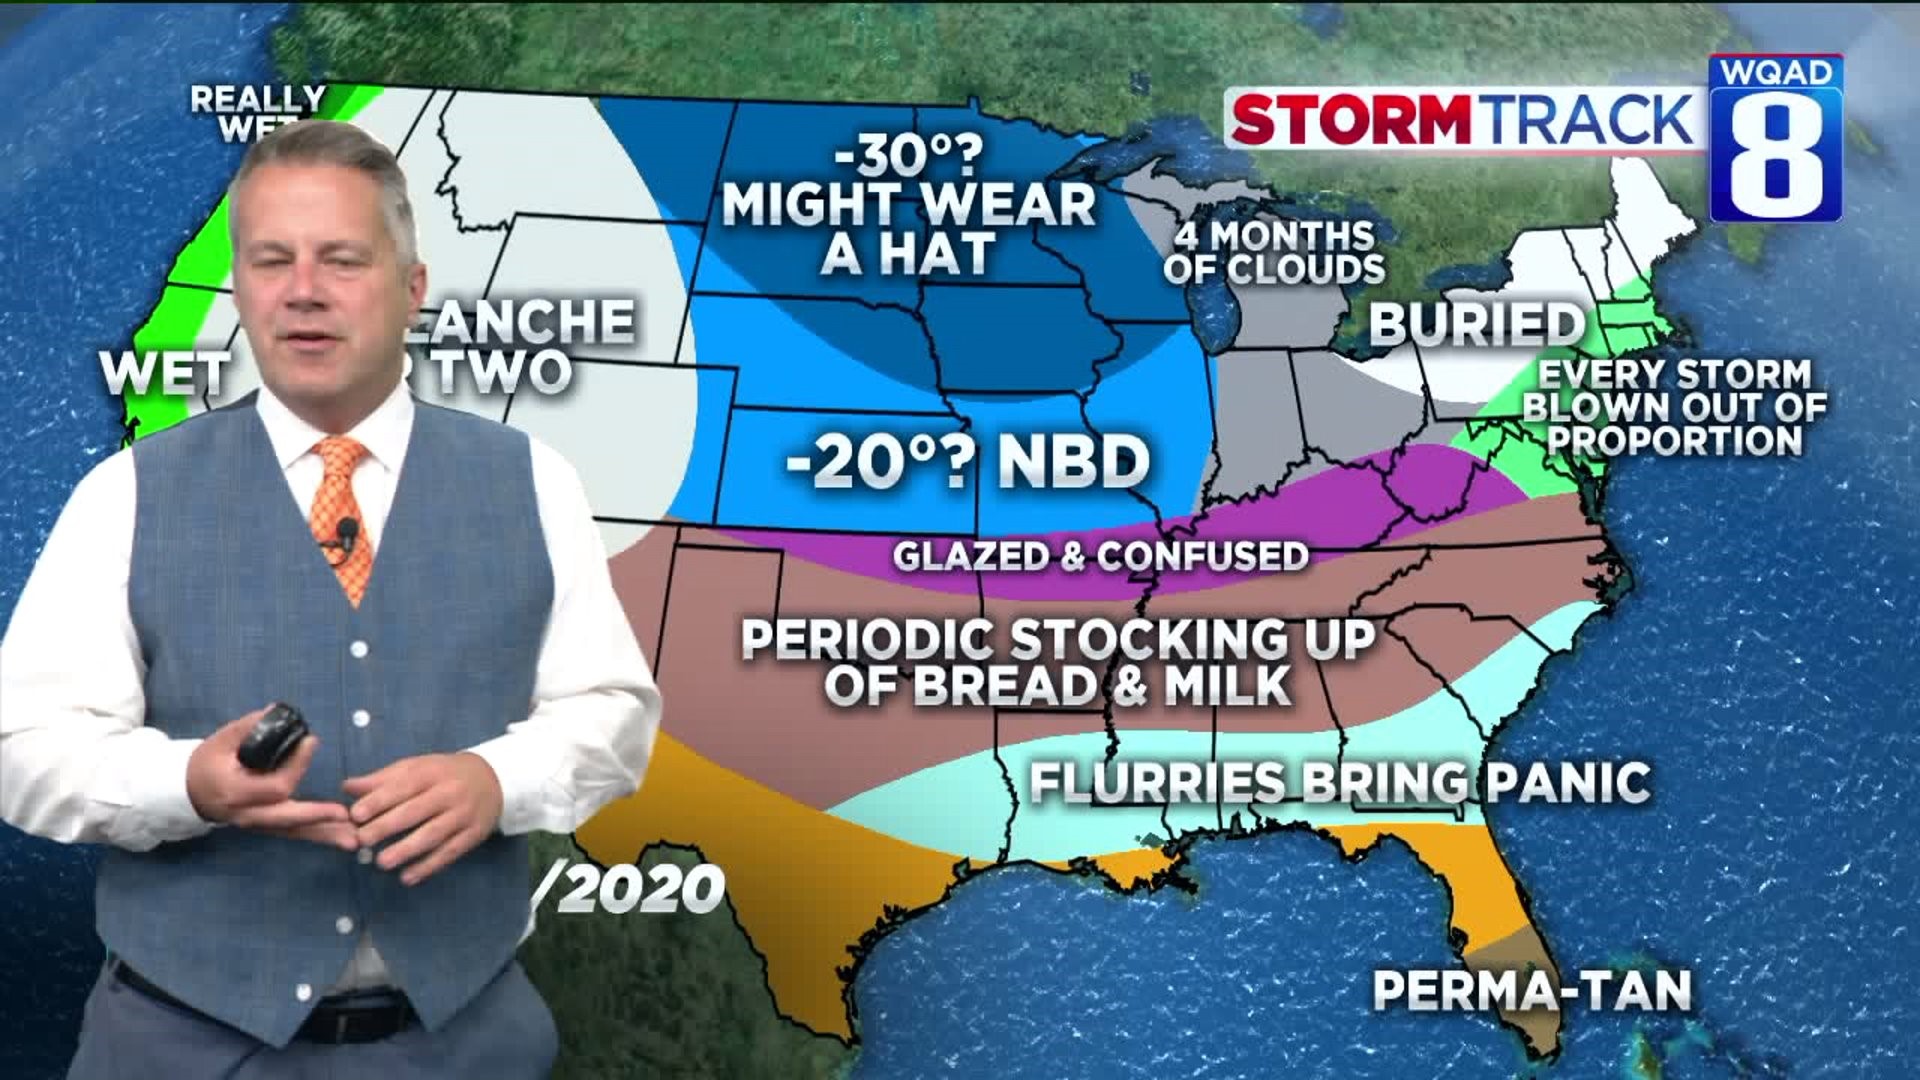 Eric unveils his winter forecast for 2019-2020